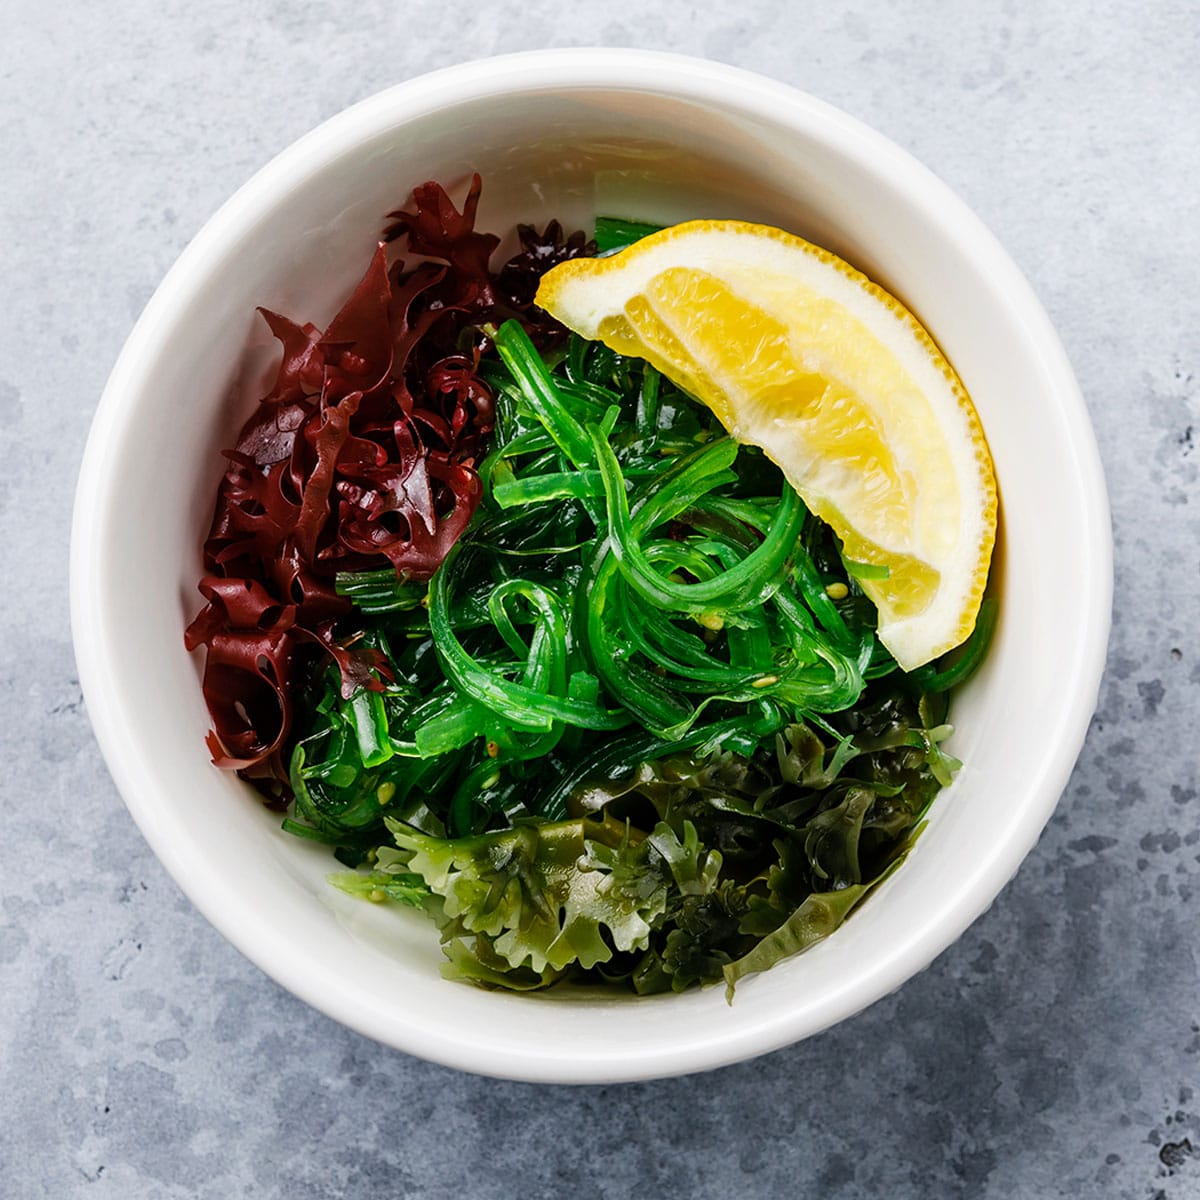 A batch of seaweed salad you just made will keep for up to 3 to 4 days in your fridge, and if dried and packaged, it can last for years and will still be good.